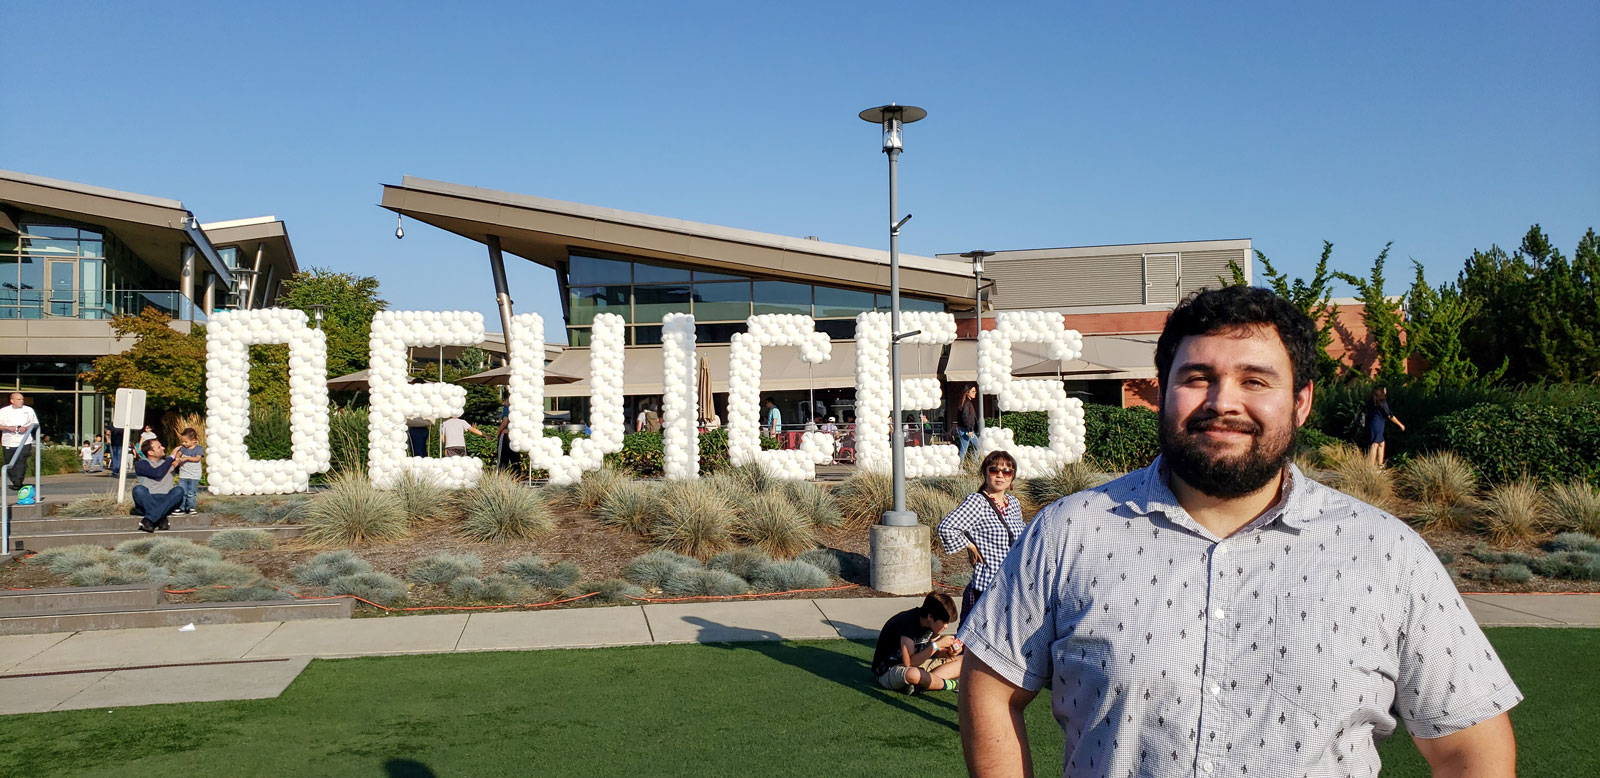 Samuel Perez Diarte stands in front of a Microsoft building with a gigantic "DEVICES" made of balloons in the background